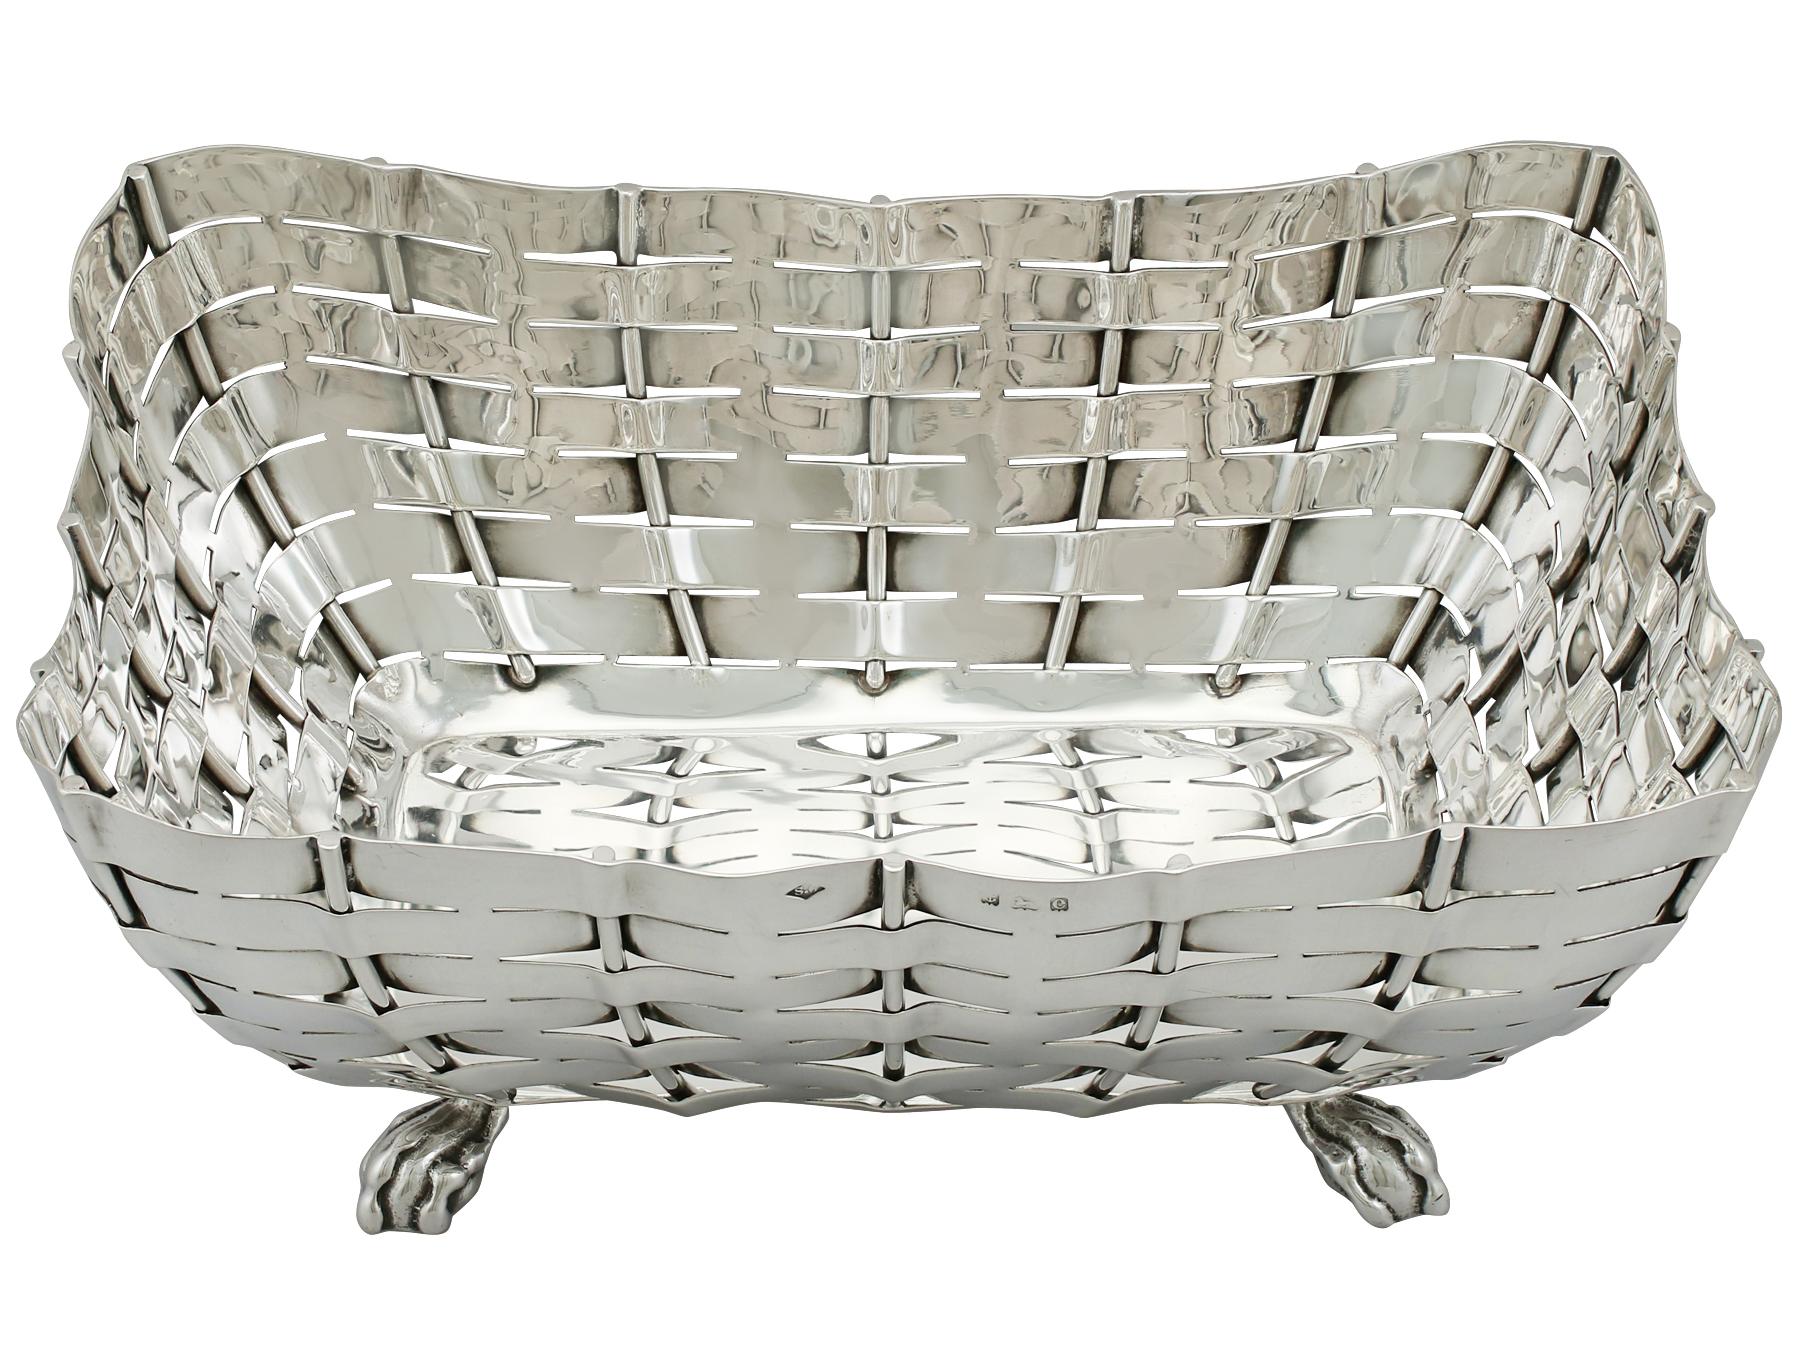 An exceptional, fine and impressive, large antique Edwardian sterling silver bread dish; an addition to our ornamental silverware collection.

This exceptional antique Edwardian sterling silver dish has a rounded rectangular form.

The body of